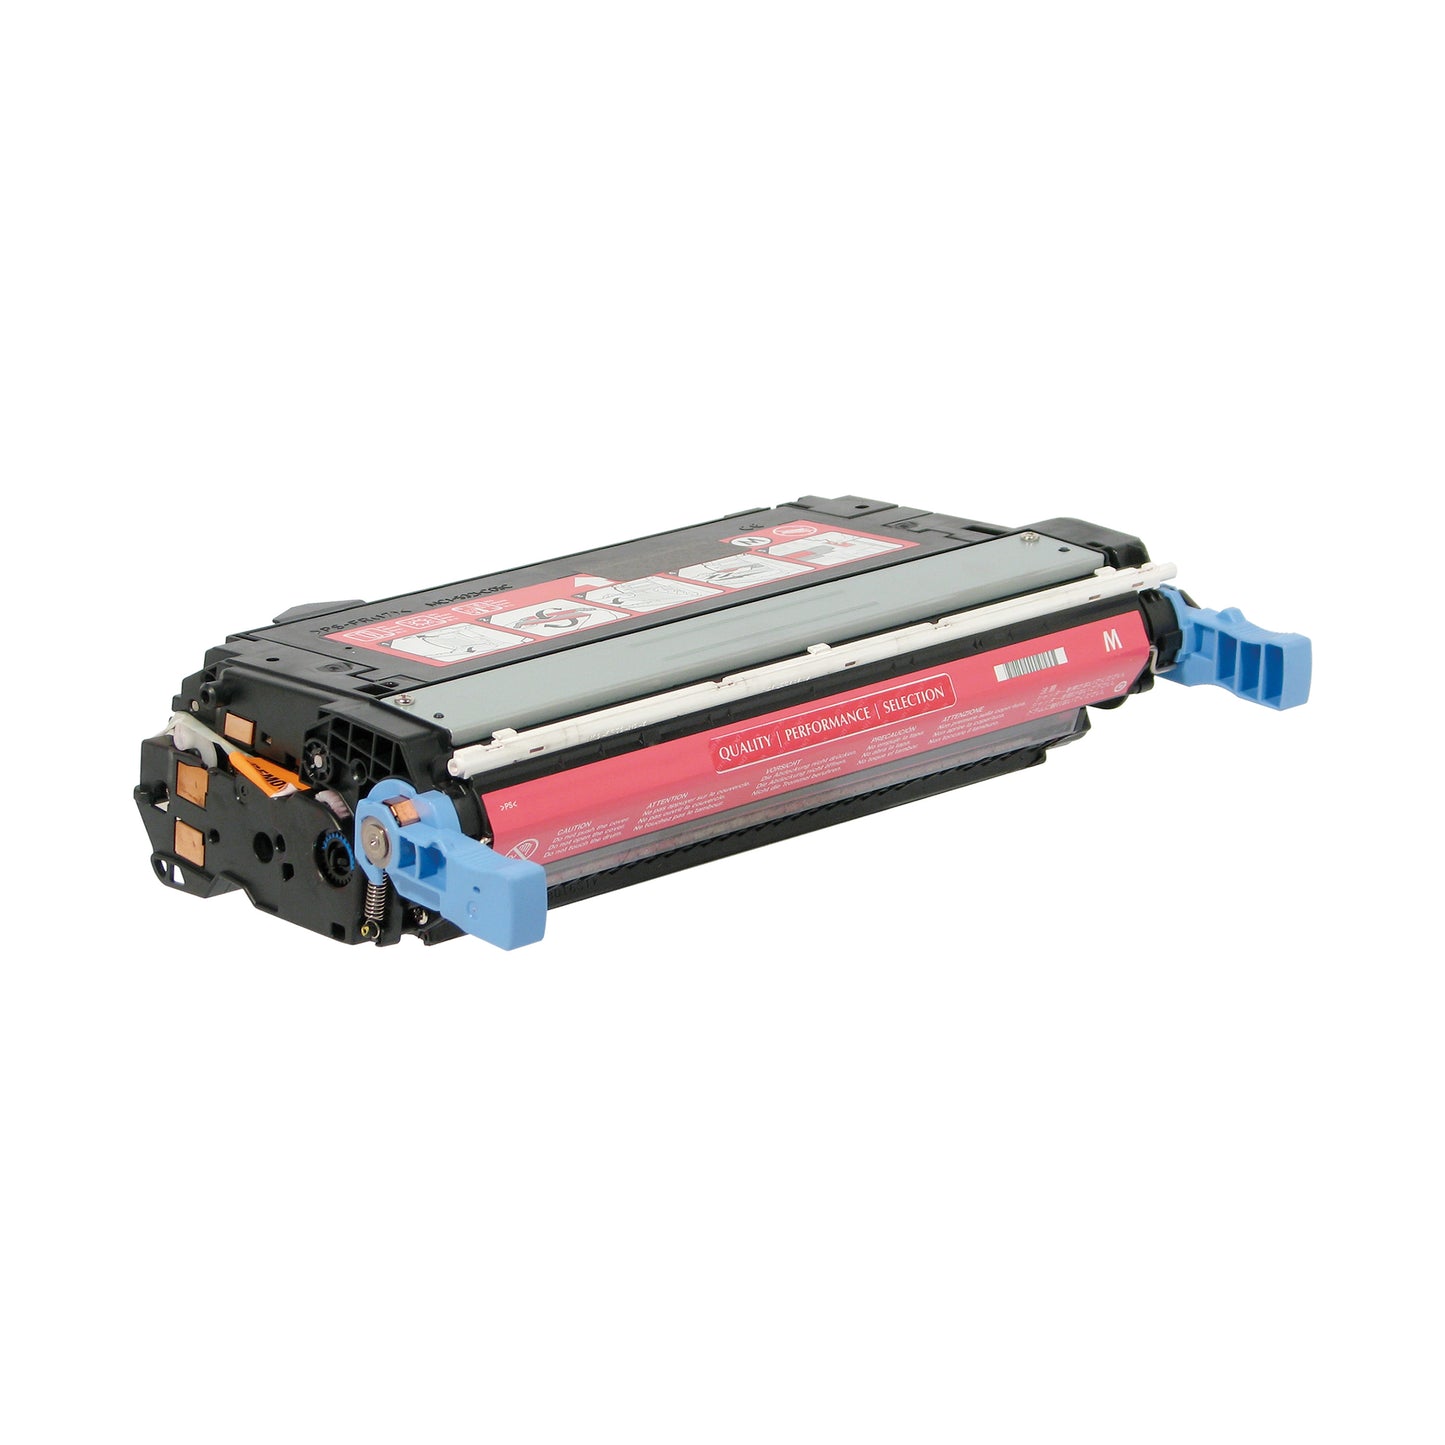 HP 624A (CB403A) Magenta Remanufactured Toner Cartridge [7,500 pages]